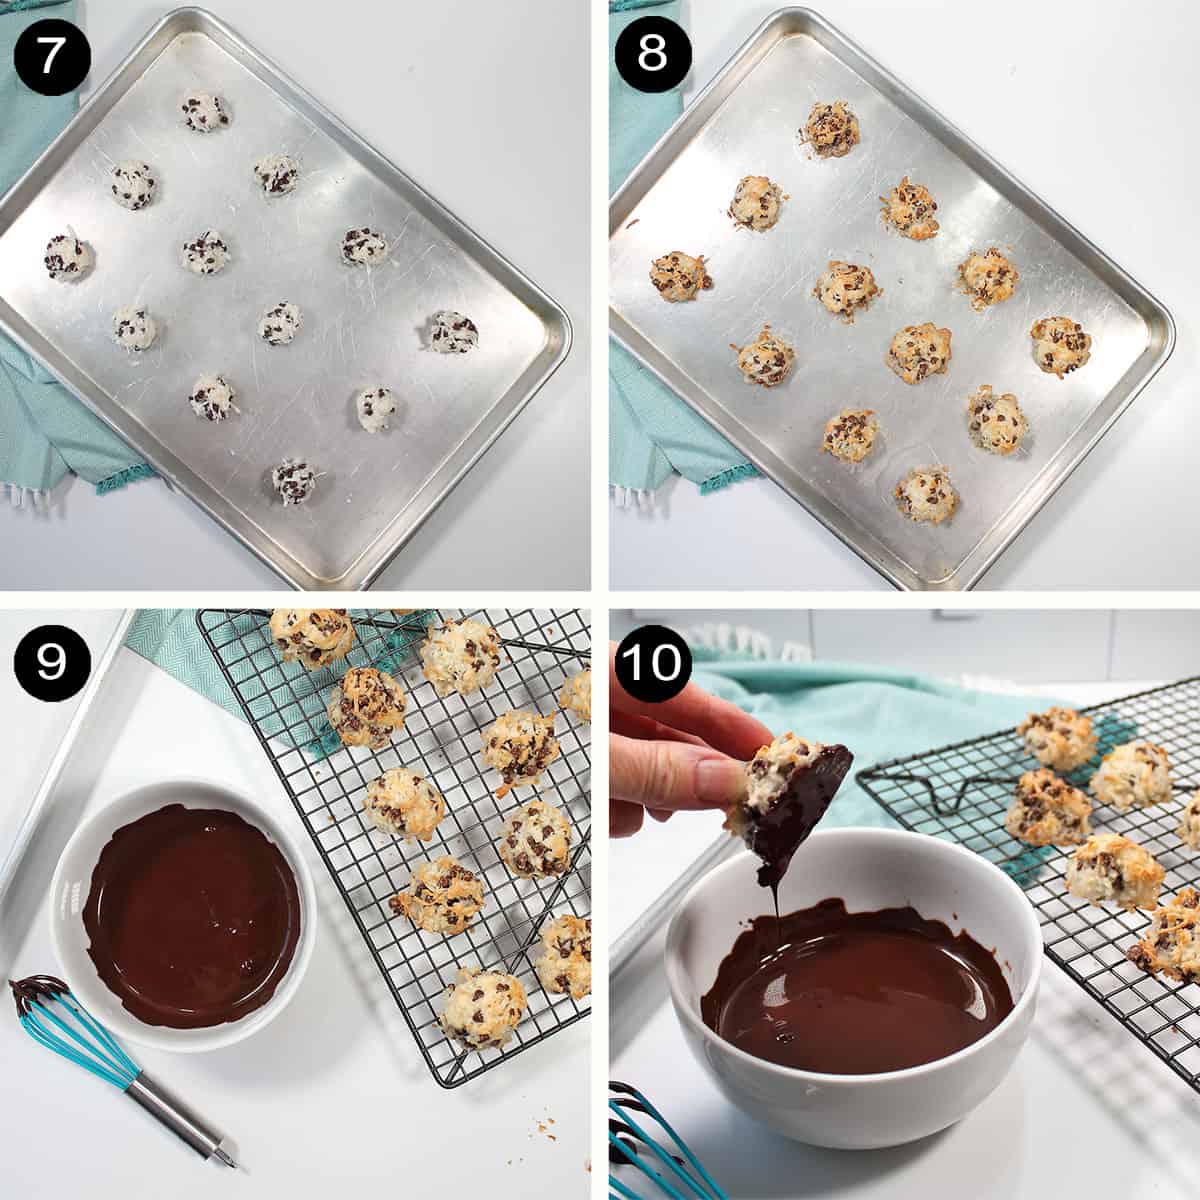 Making cookies and dipping in chocolate steps.